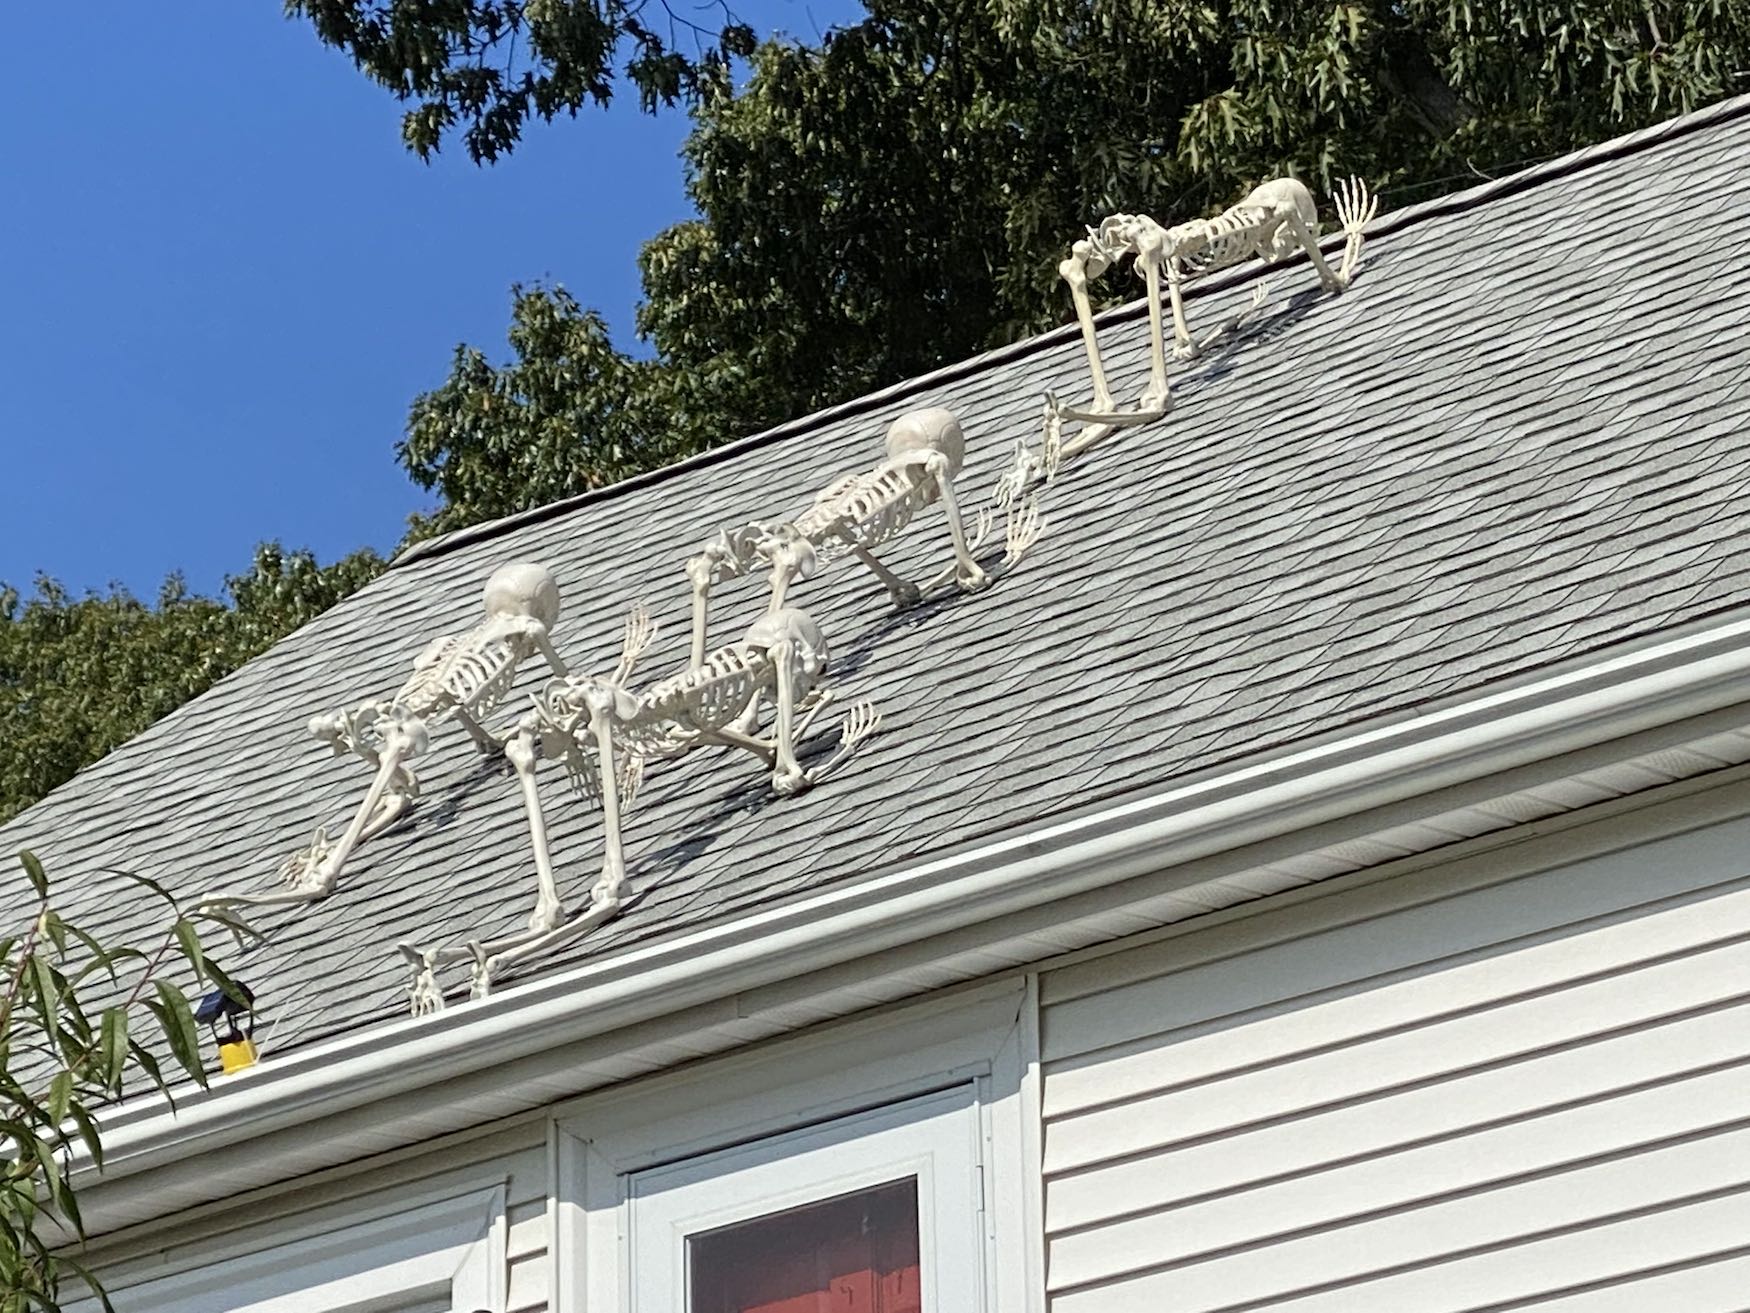 It's the weekend! Number 224, Halloween Skeletons Scale a Roof